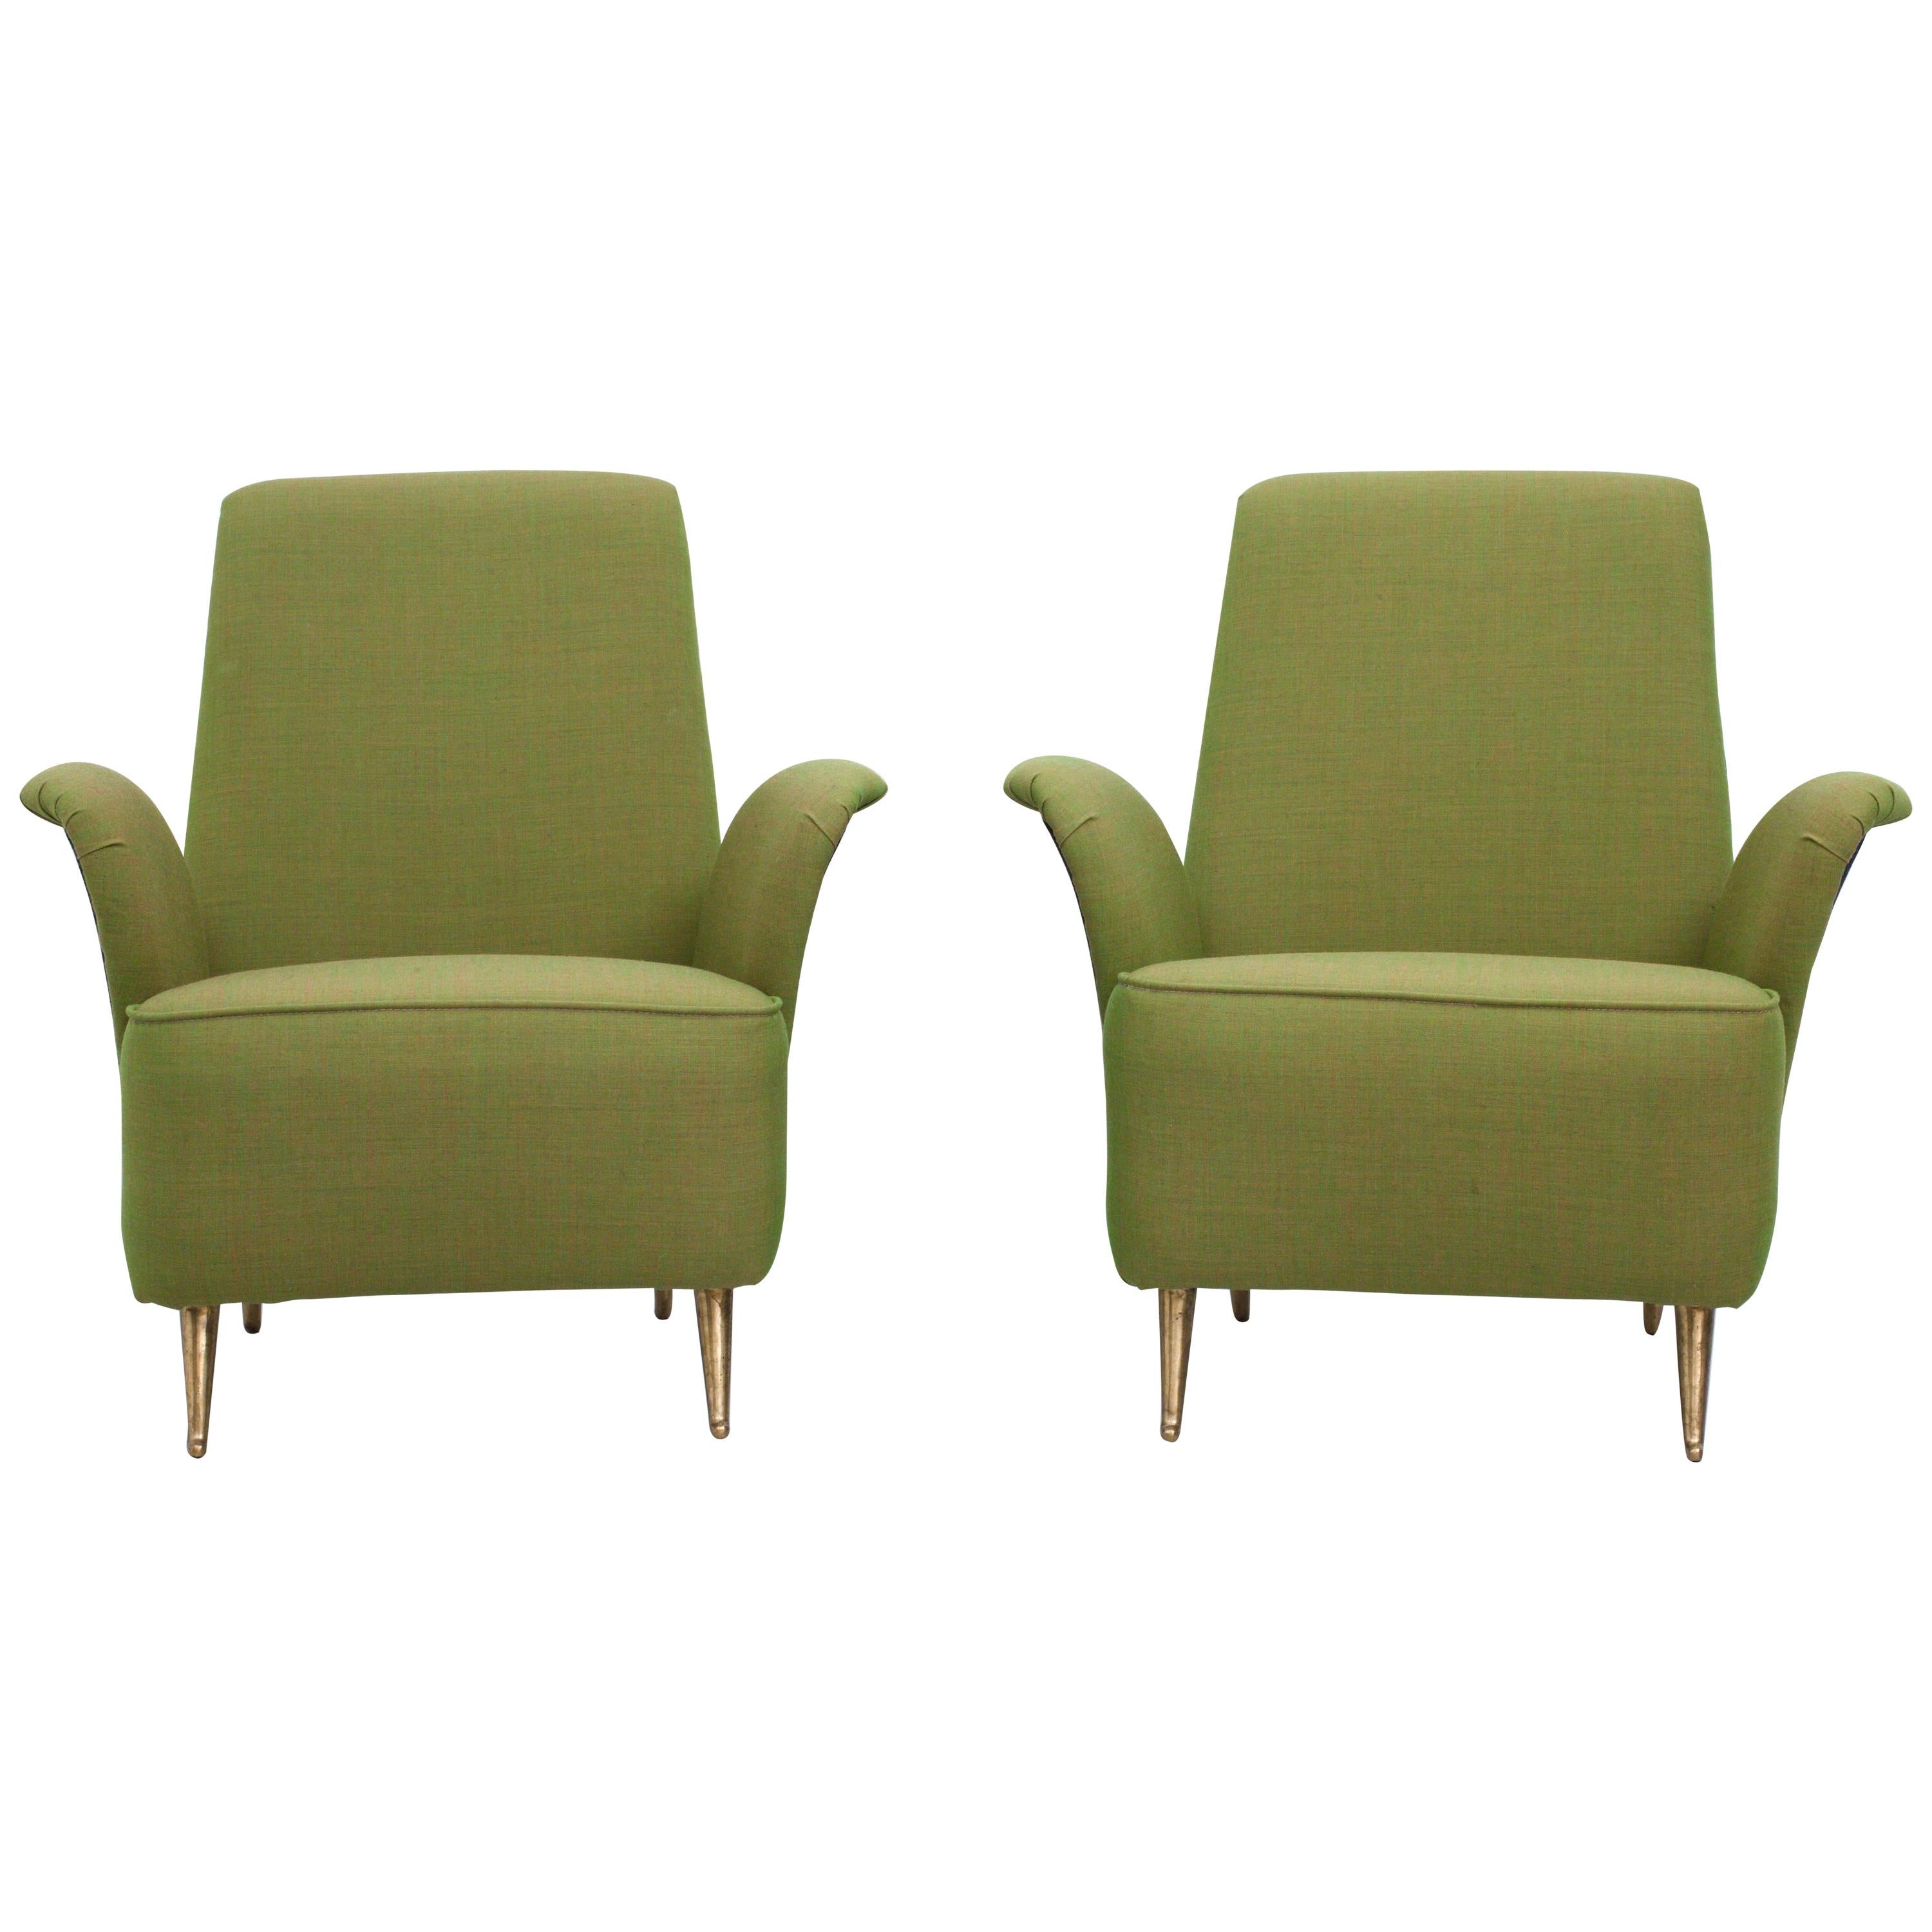 Set of Two Lounge Chairs in Fabric and Brass by i.S.a., Italy, 1960s